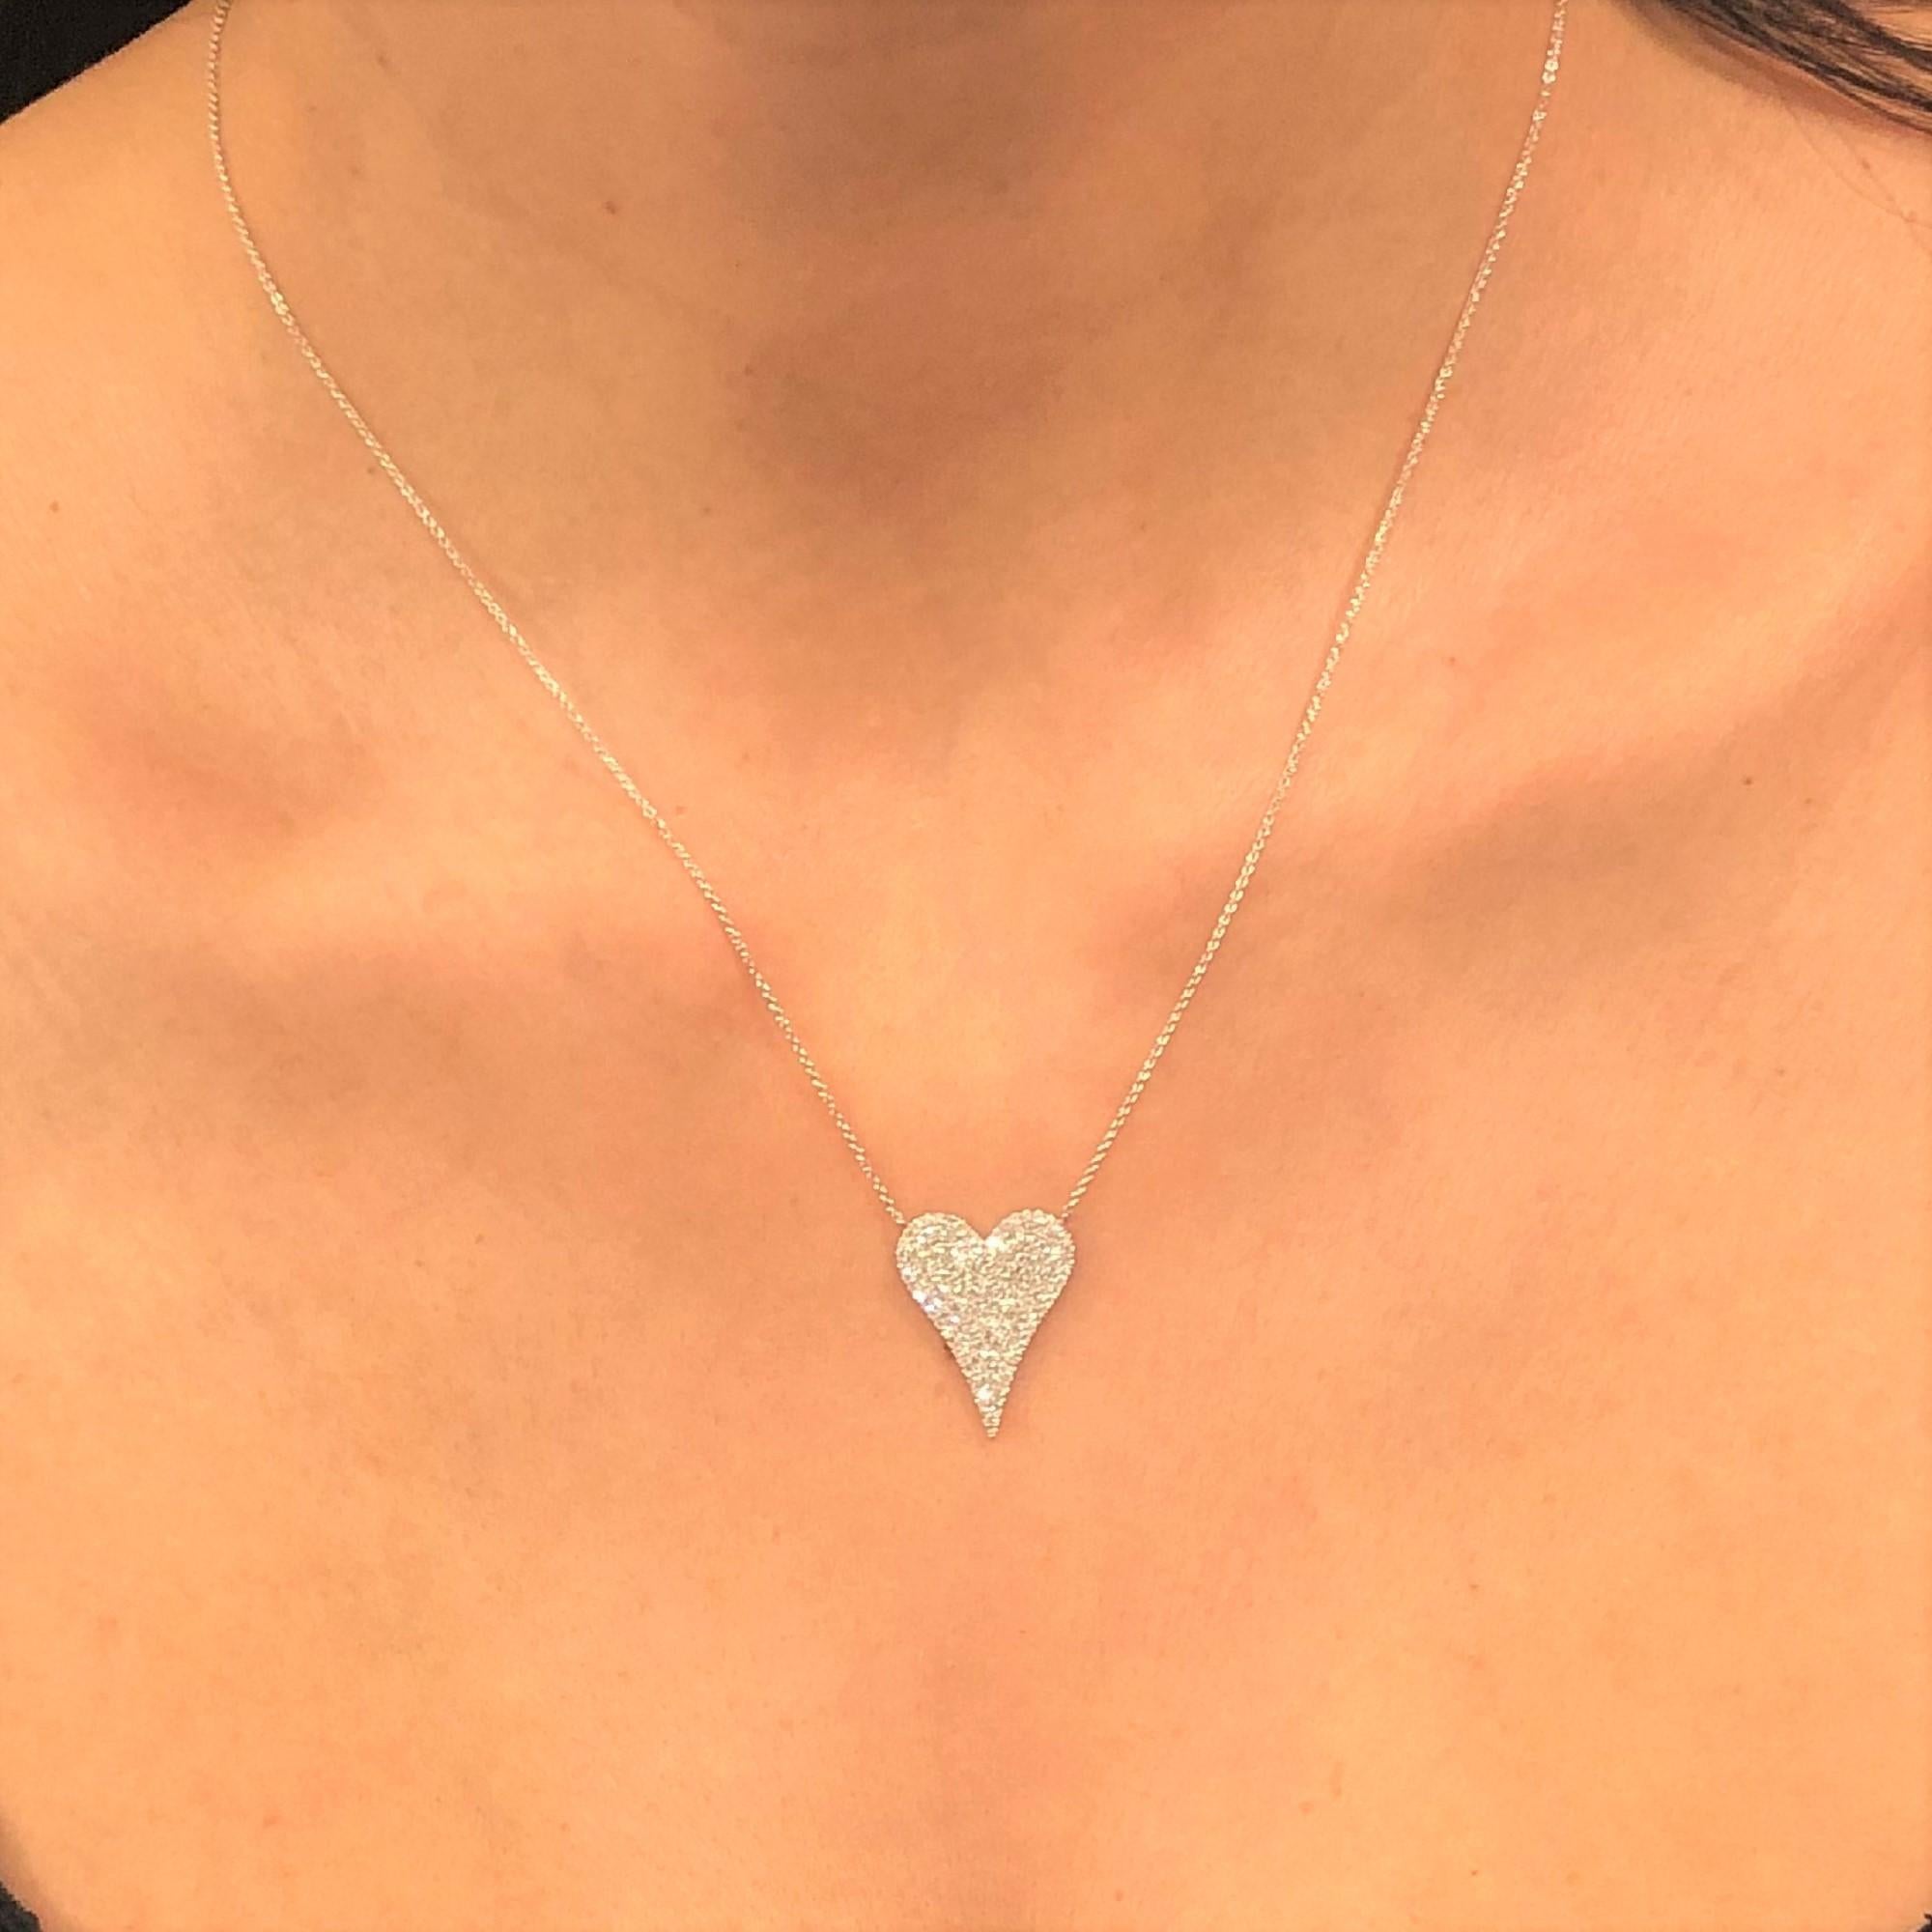 This Stunning & Exotic Pave Diamond Heart Pendant crafted of 14K White Gold features approximately 0.36Ct of Round Natural Diamonds, on a adjustable 16,17 & 18